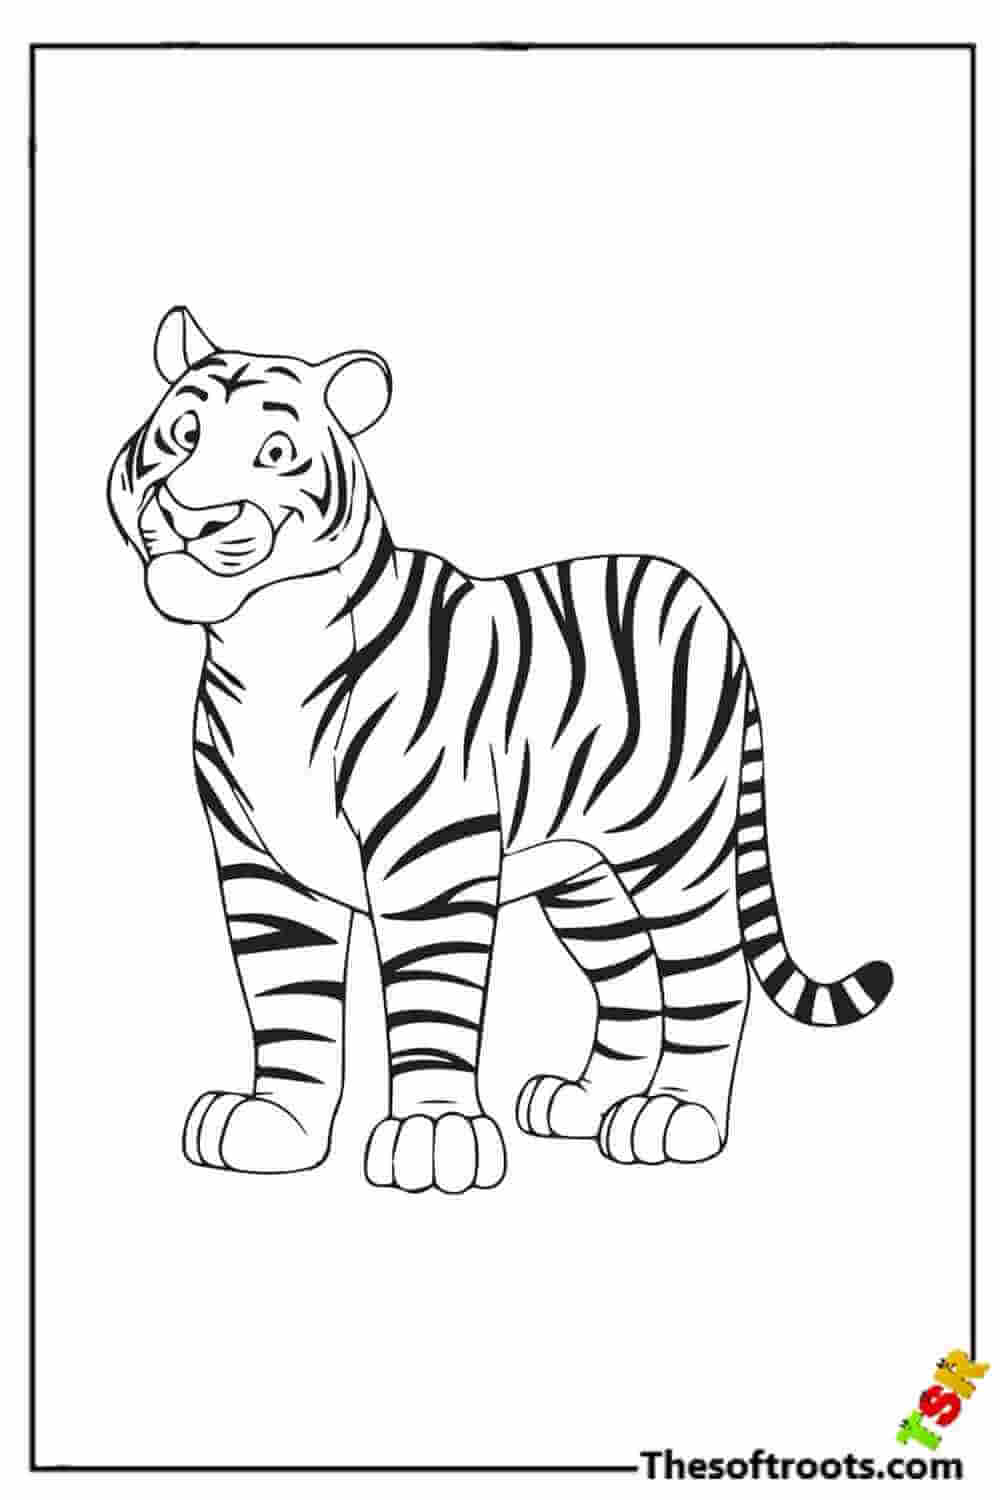 How to draw and paint tiger |Tiger drawing colouring painting for kids  @AritriArts - YouTube